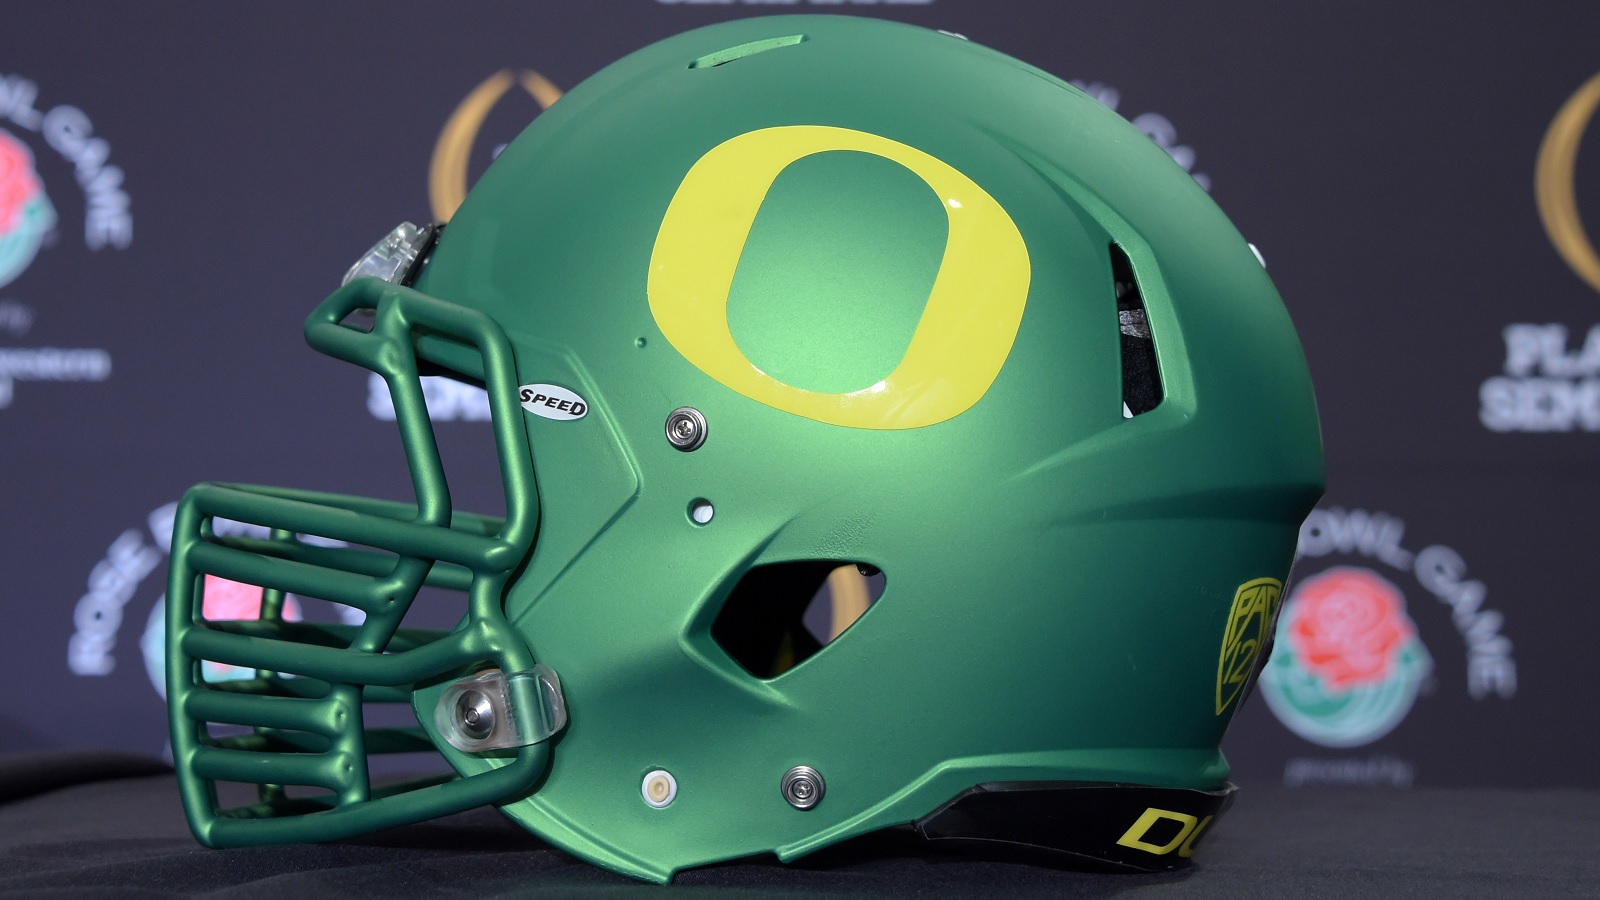 Oregon rumored to be going after Dillon Gabriel to replace Bo Nix 😳 #, College Football